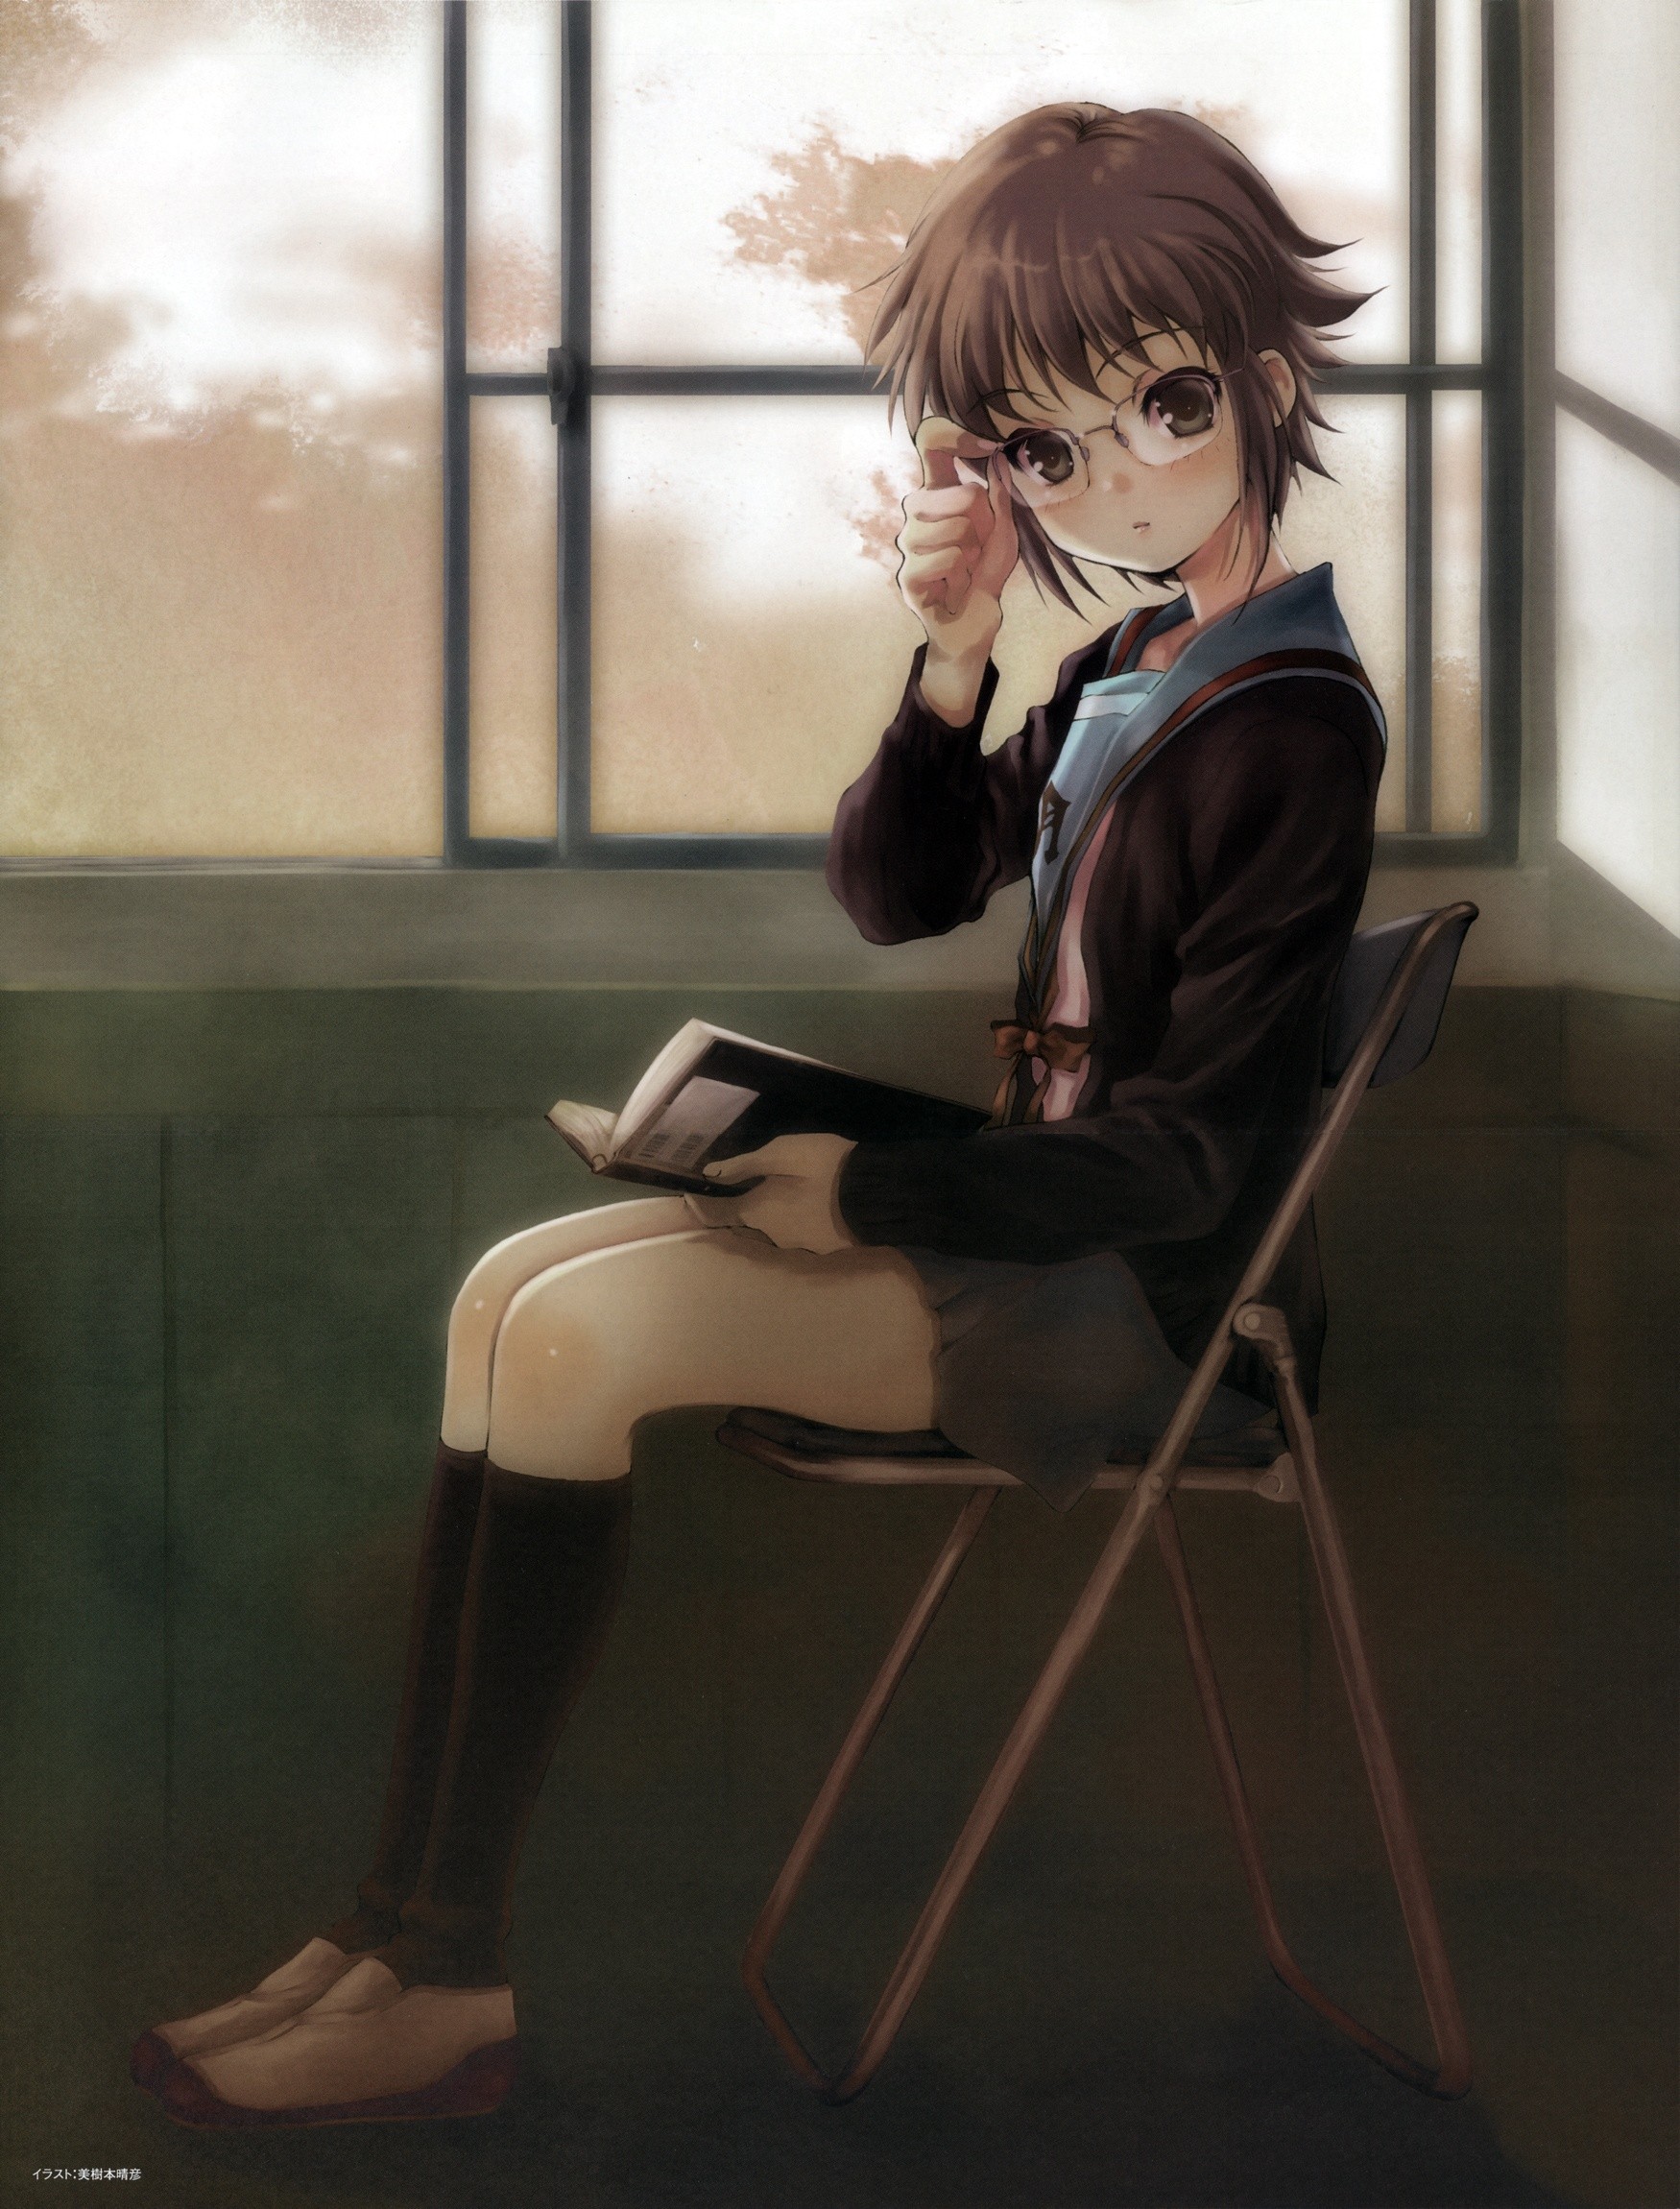 Anime girl sitting next to a pond by Racchappie on DeviantArt